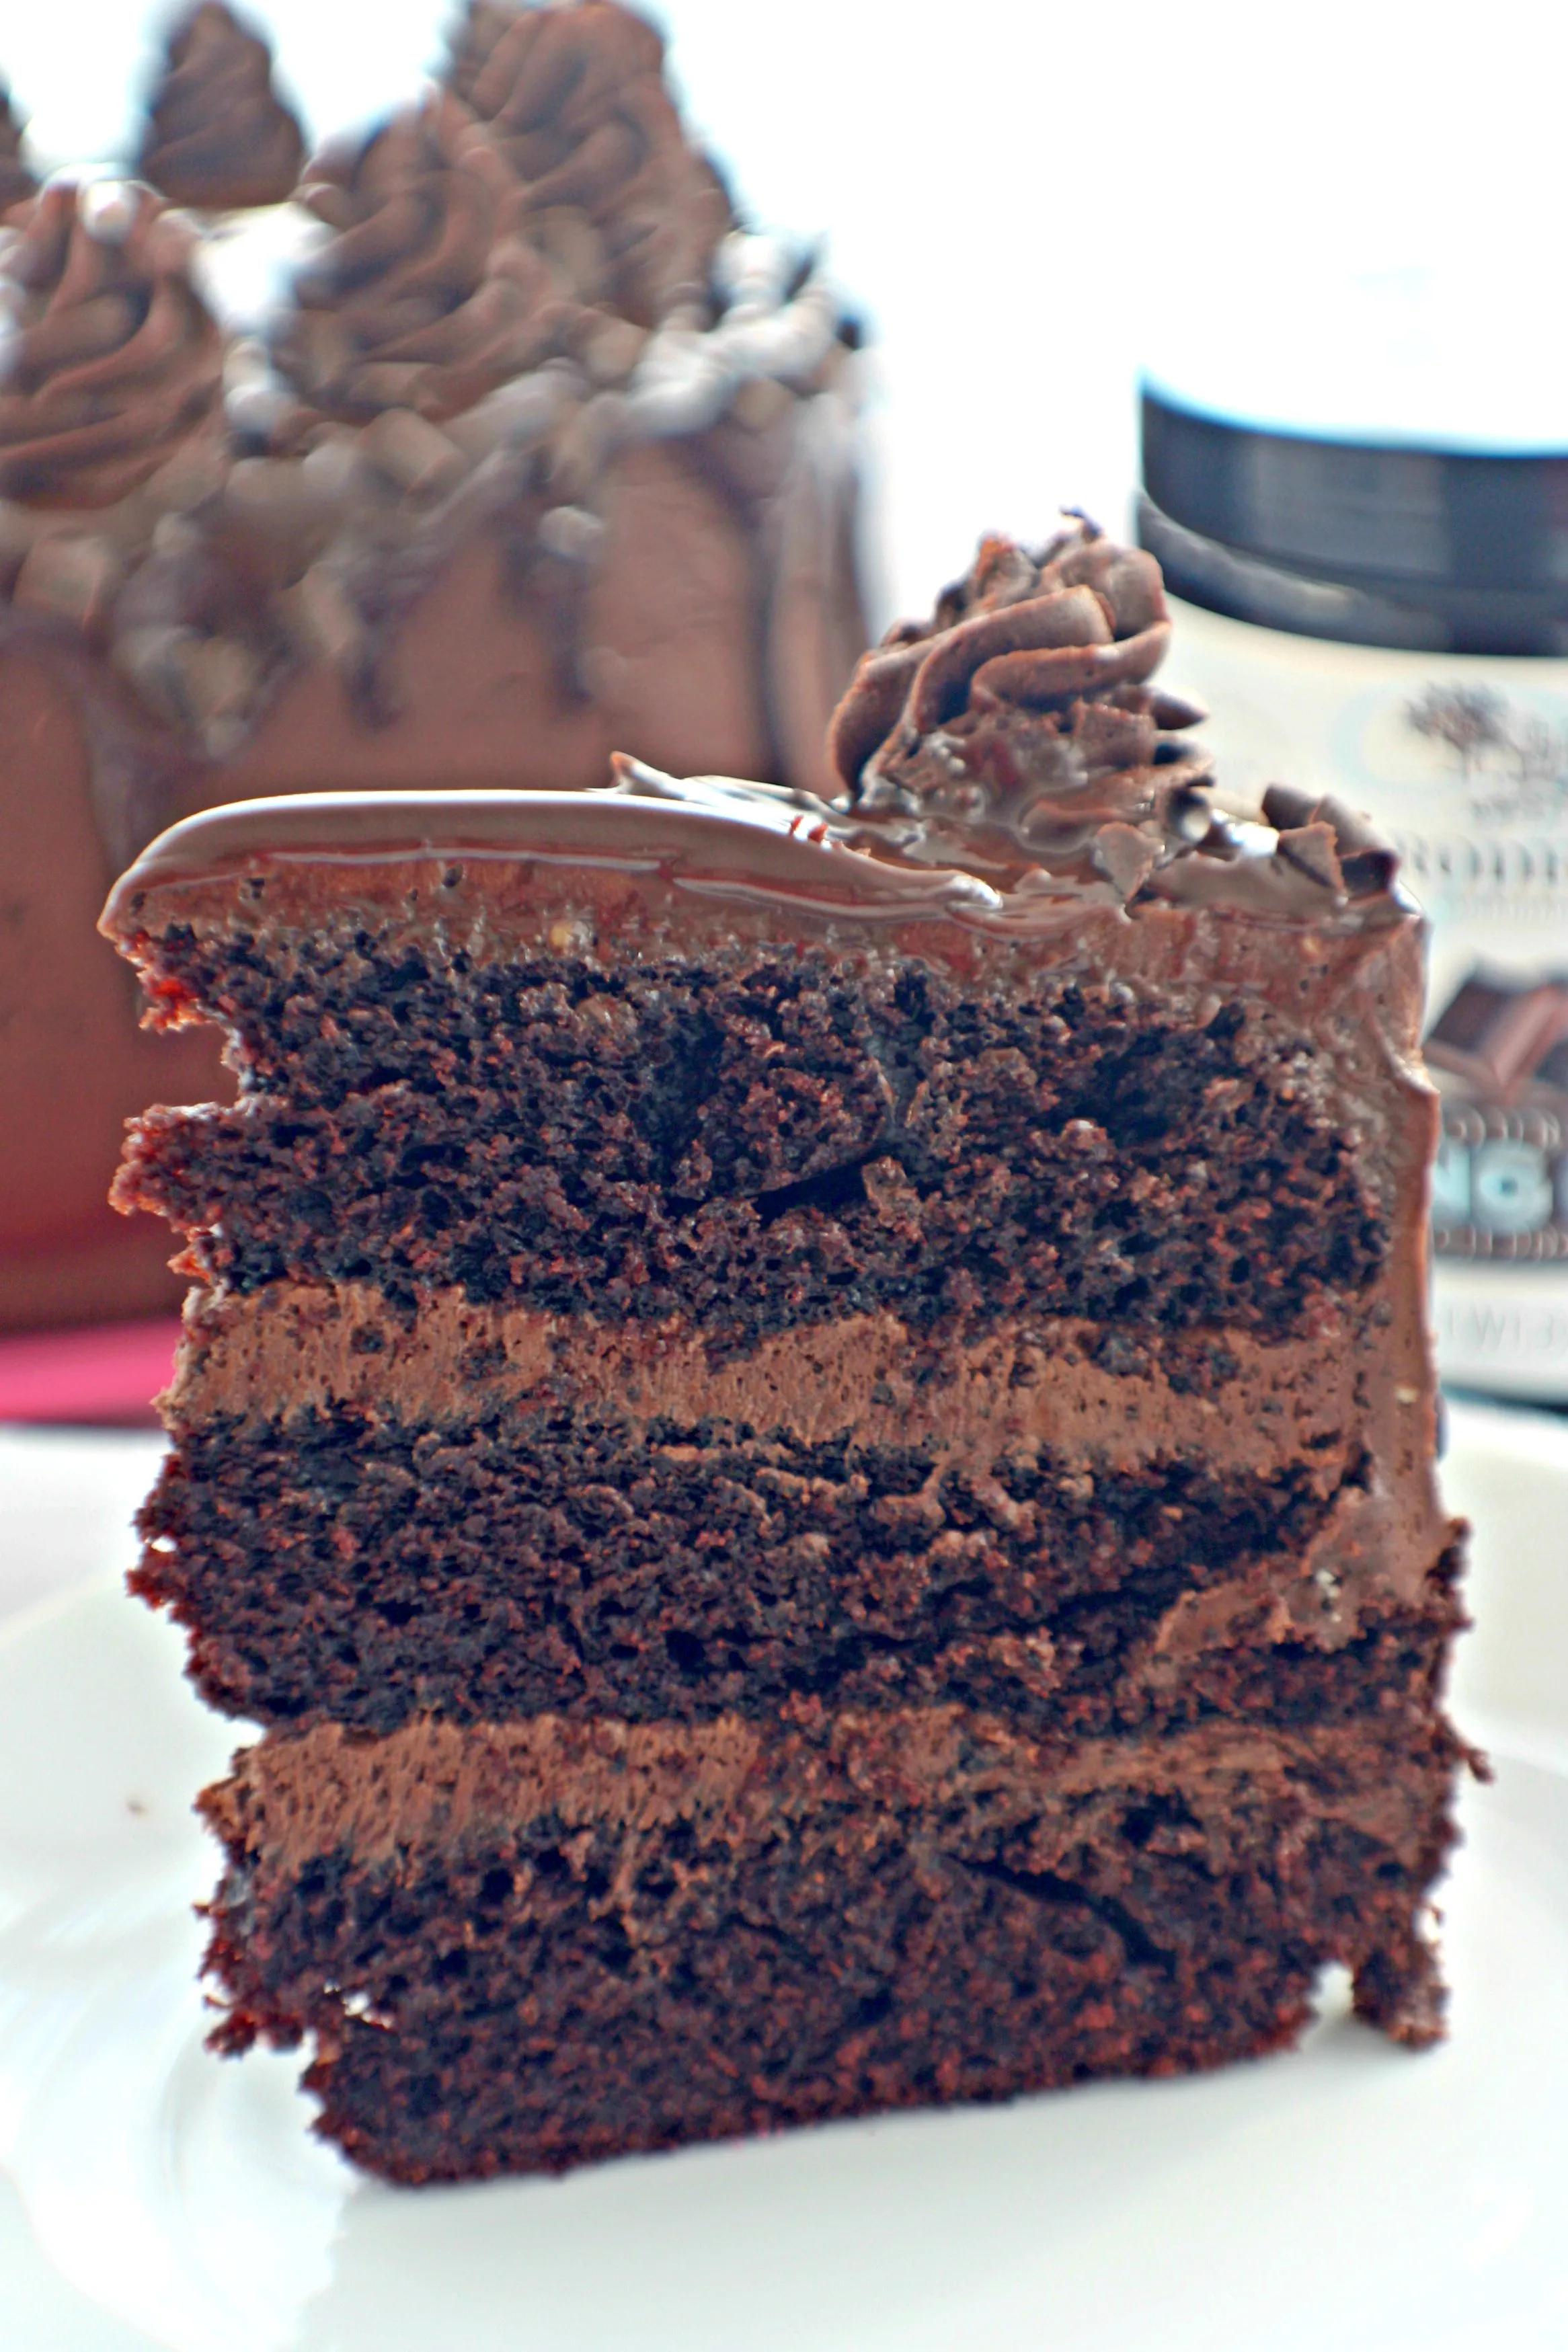 My Best Chocolate Cake - Makes, Bakes and Decor